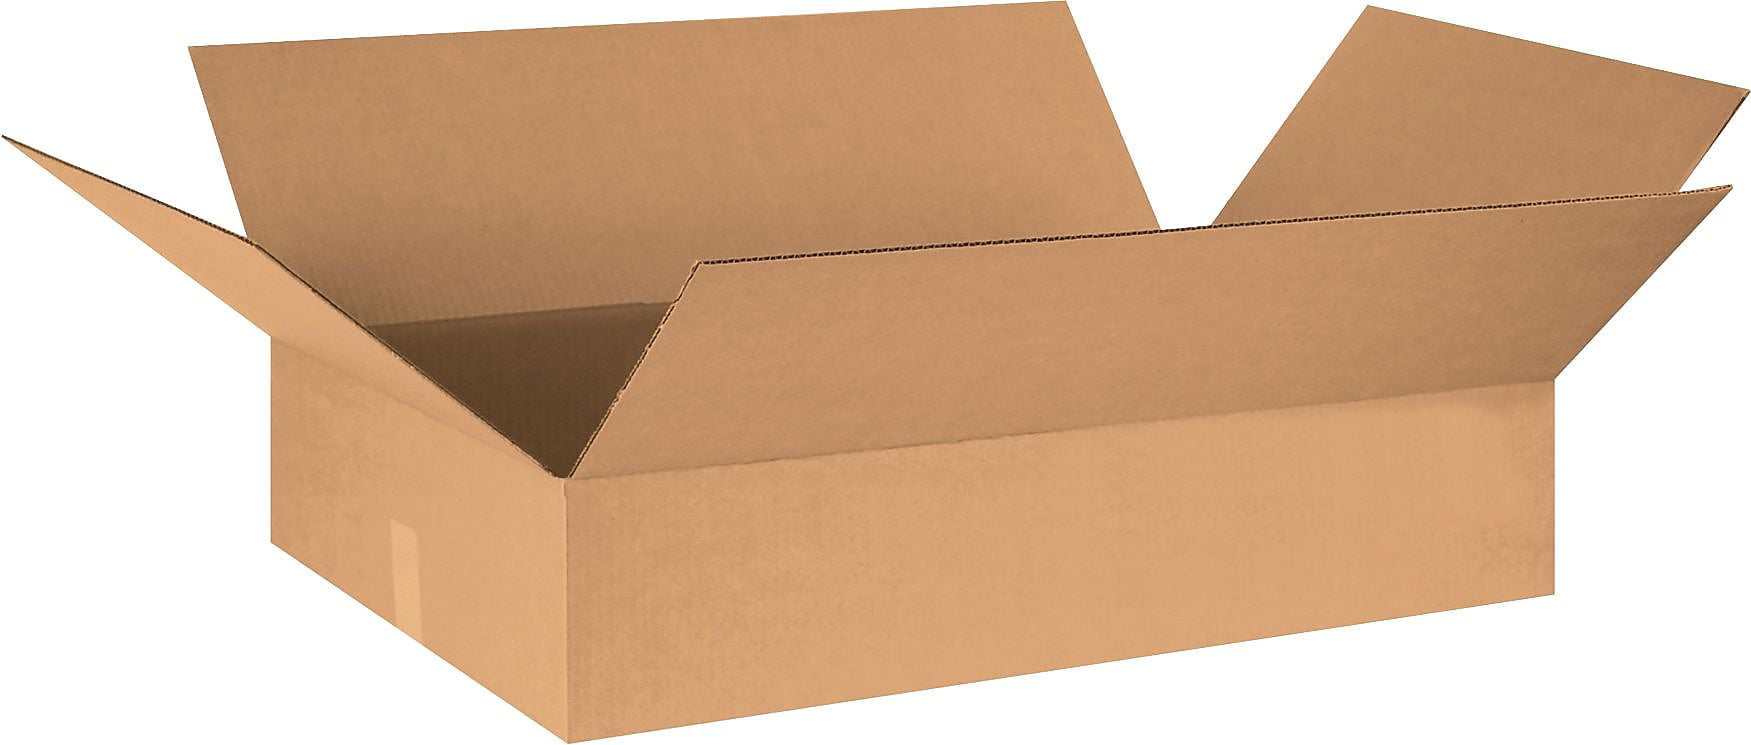 staples shipping boxes